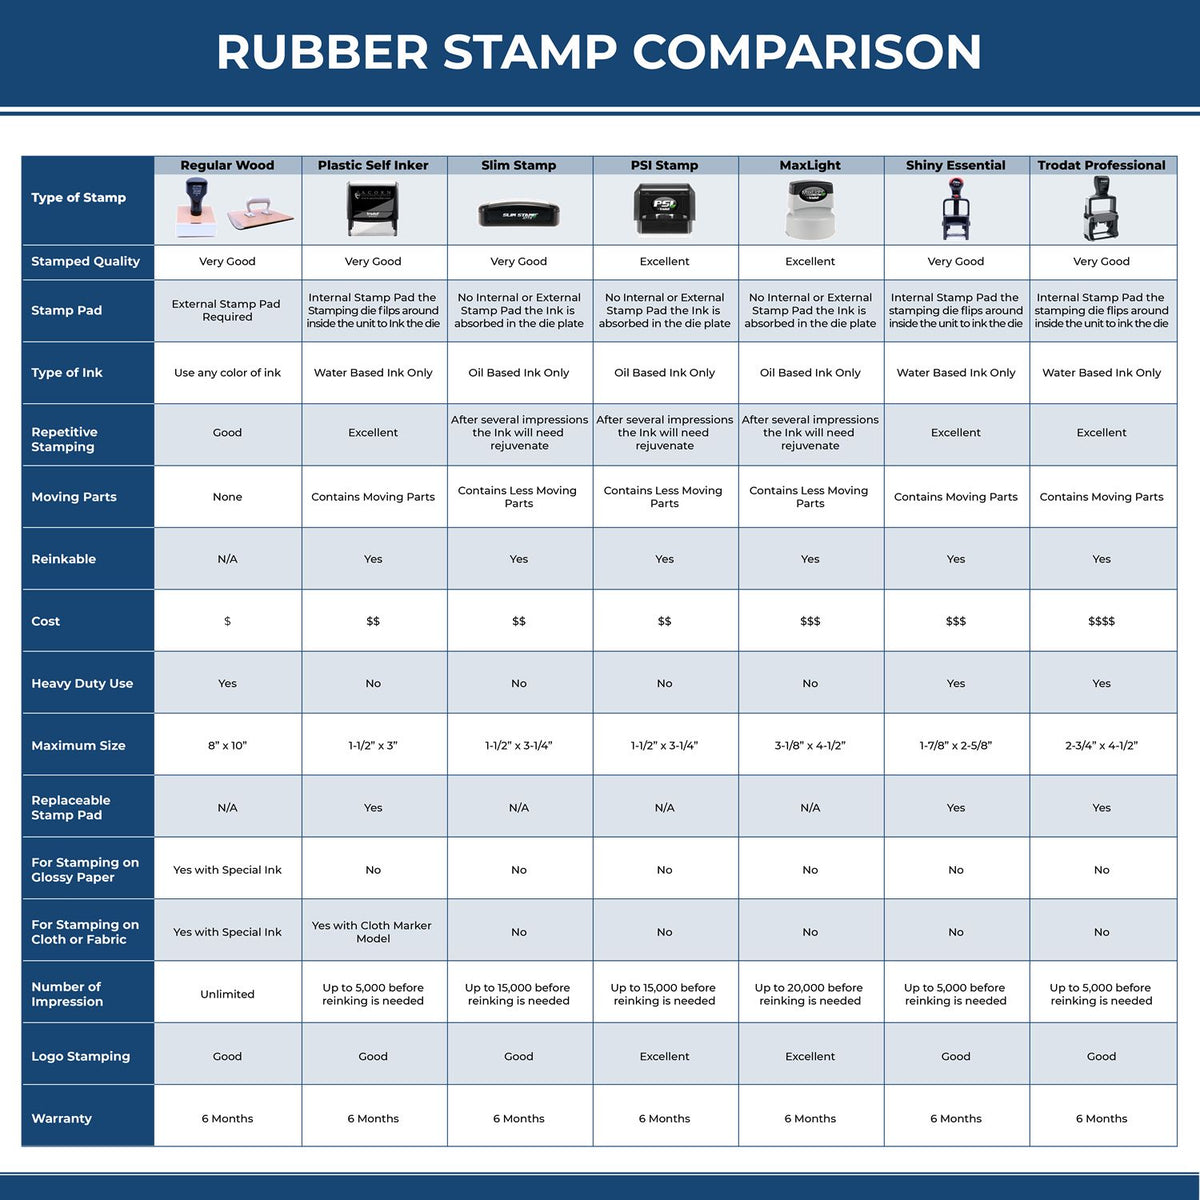 A comparison chart for the different types of mount models available for the Wooden Handle Kentucky State Seal Notary Public Stamp.